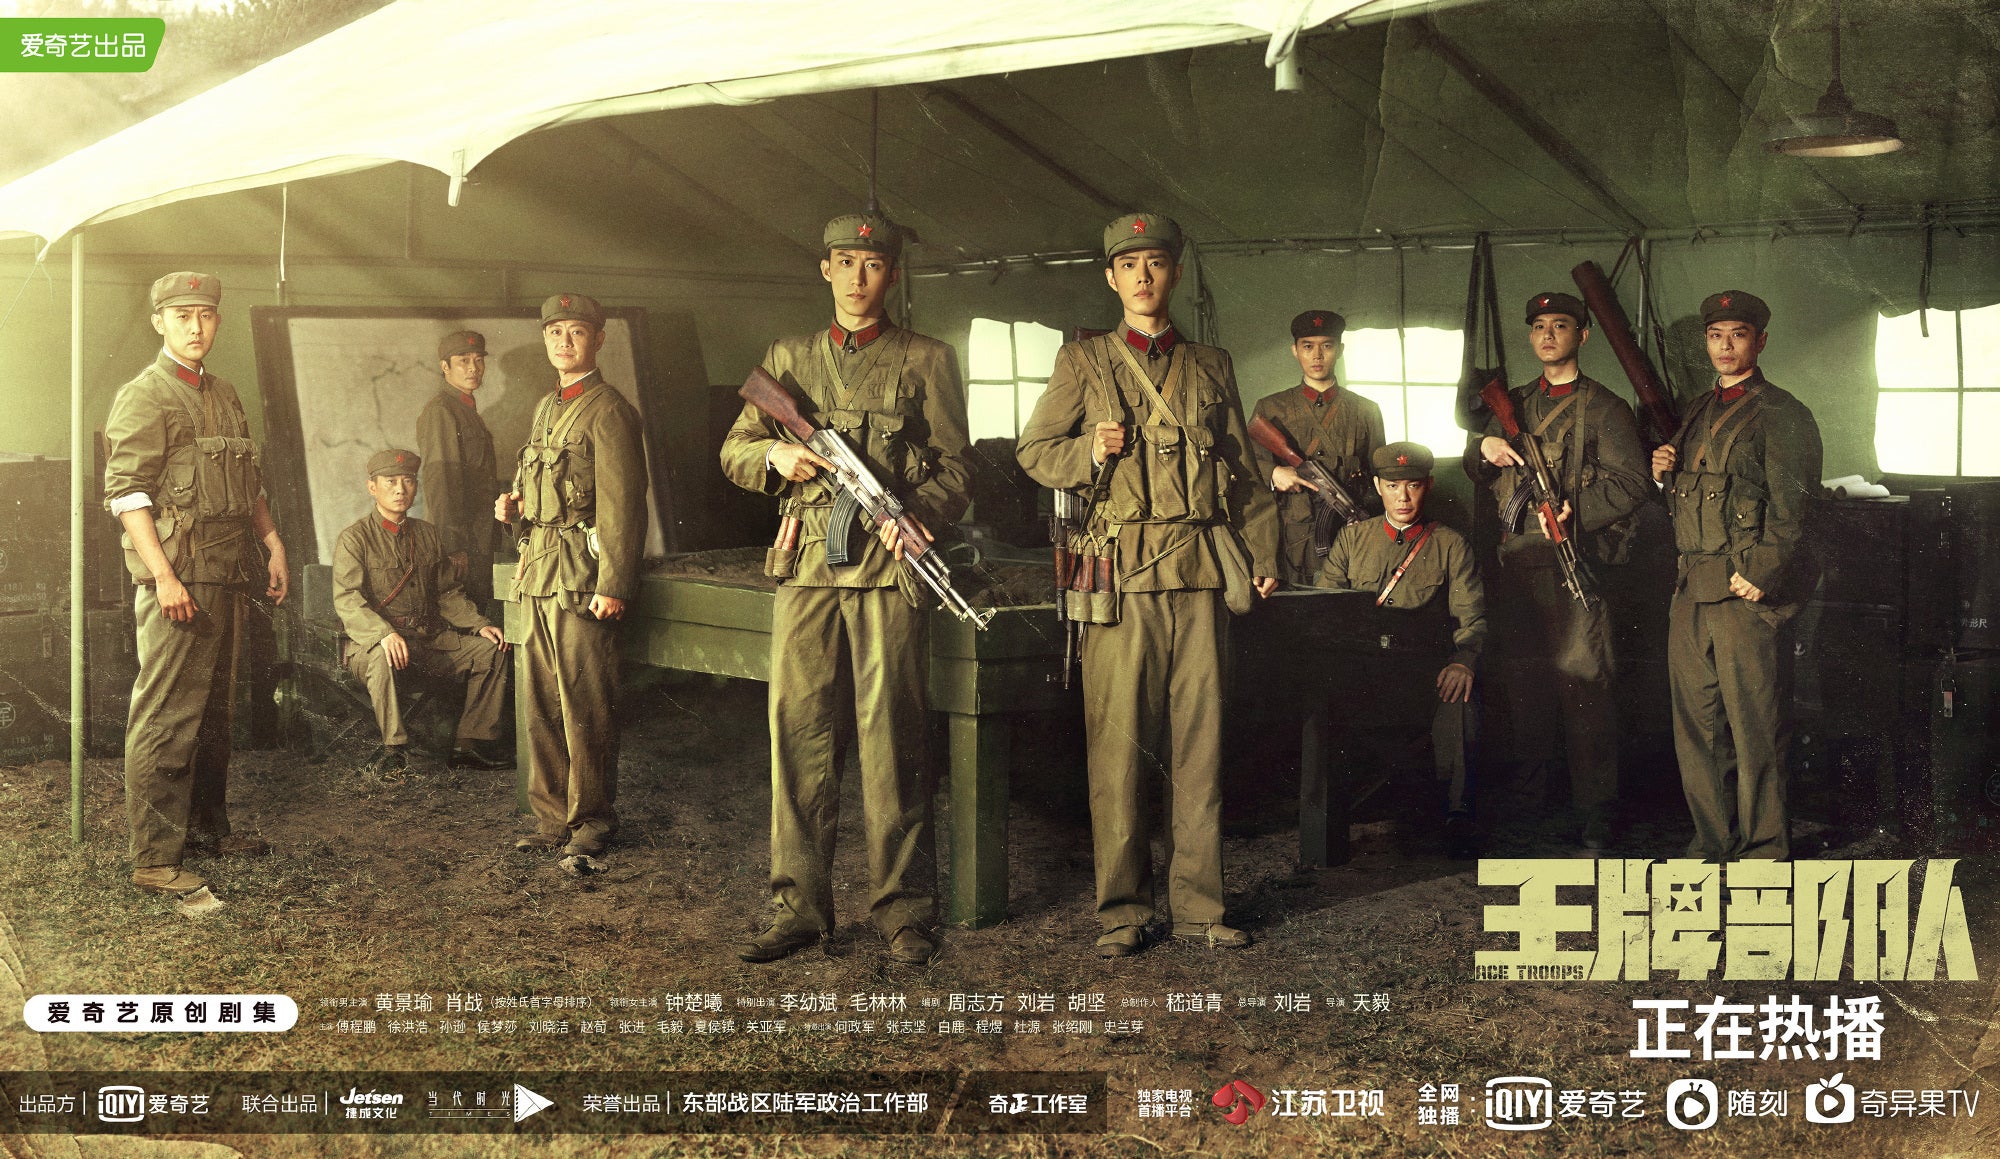 TV ratings for Ace Troops (王牌部队) in South Africa. iQiyi TV series